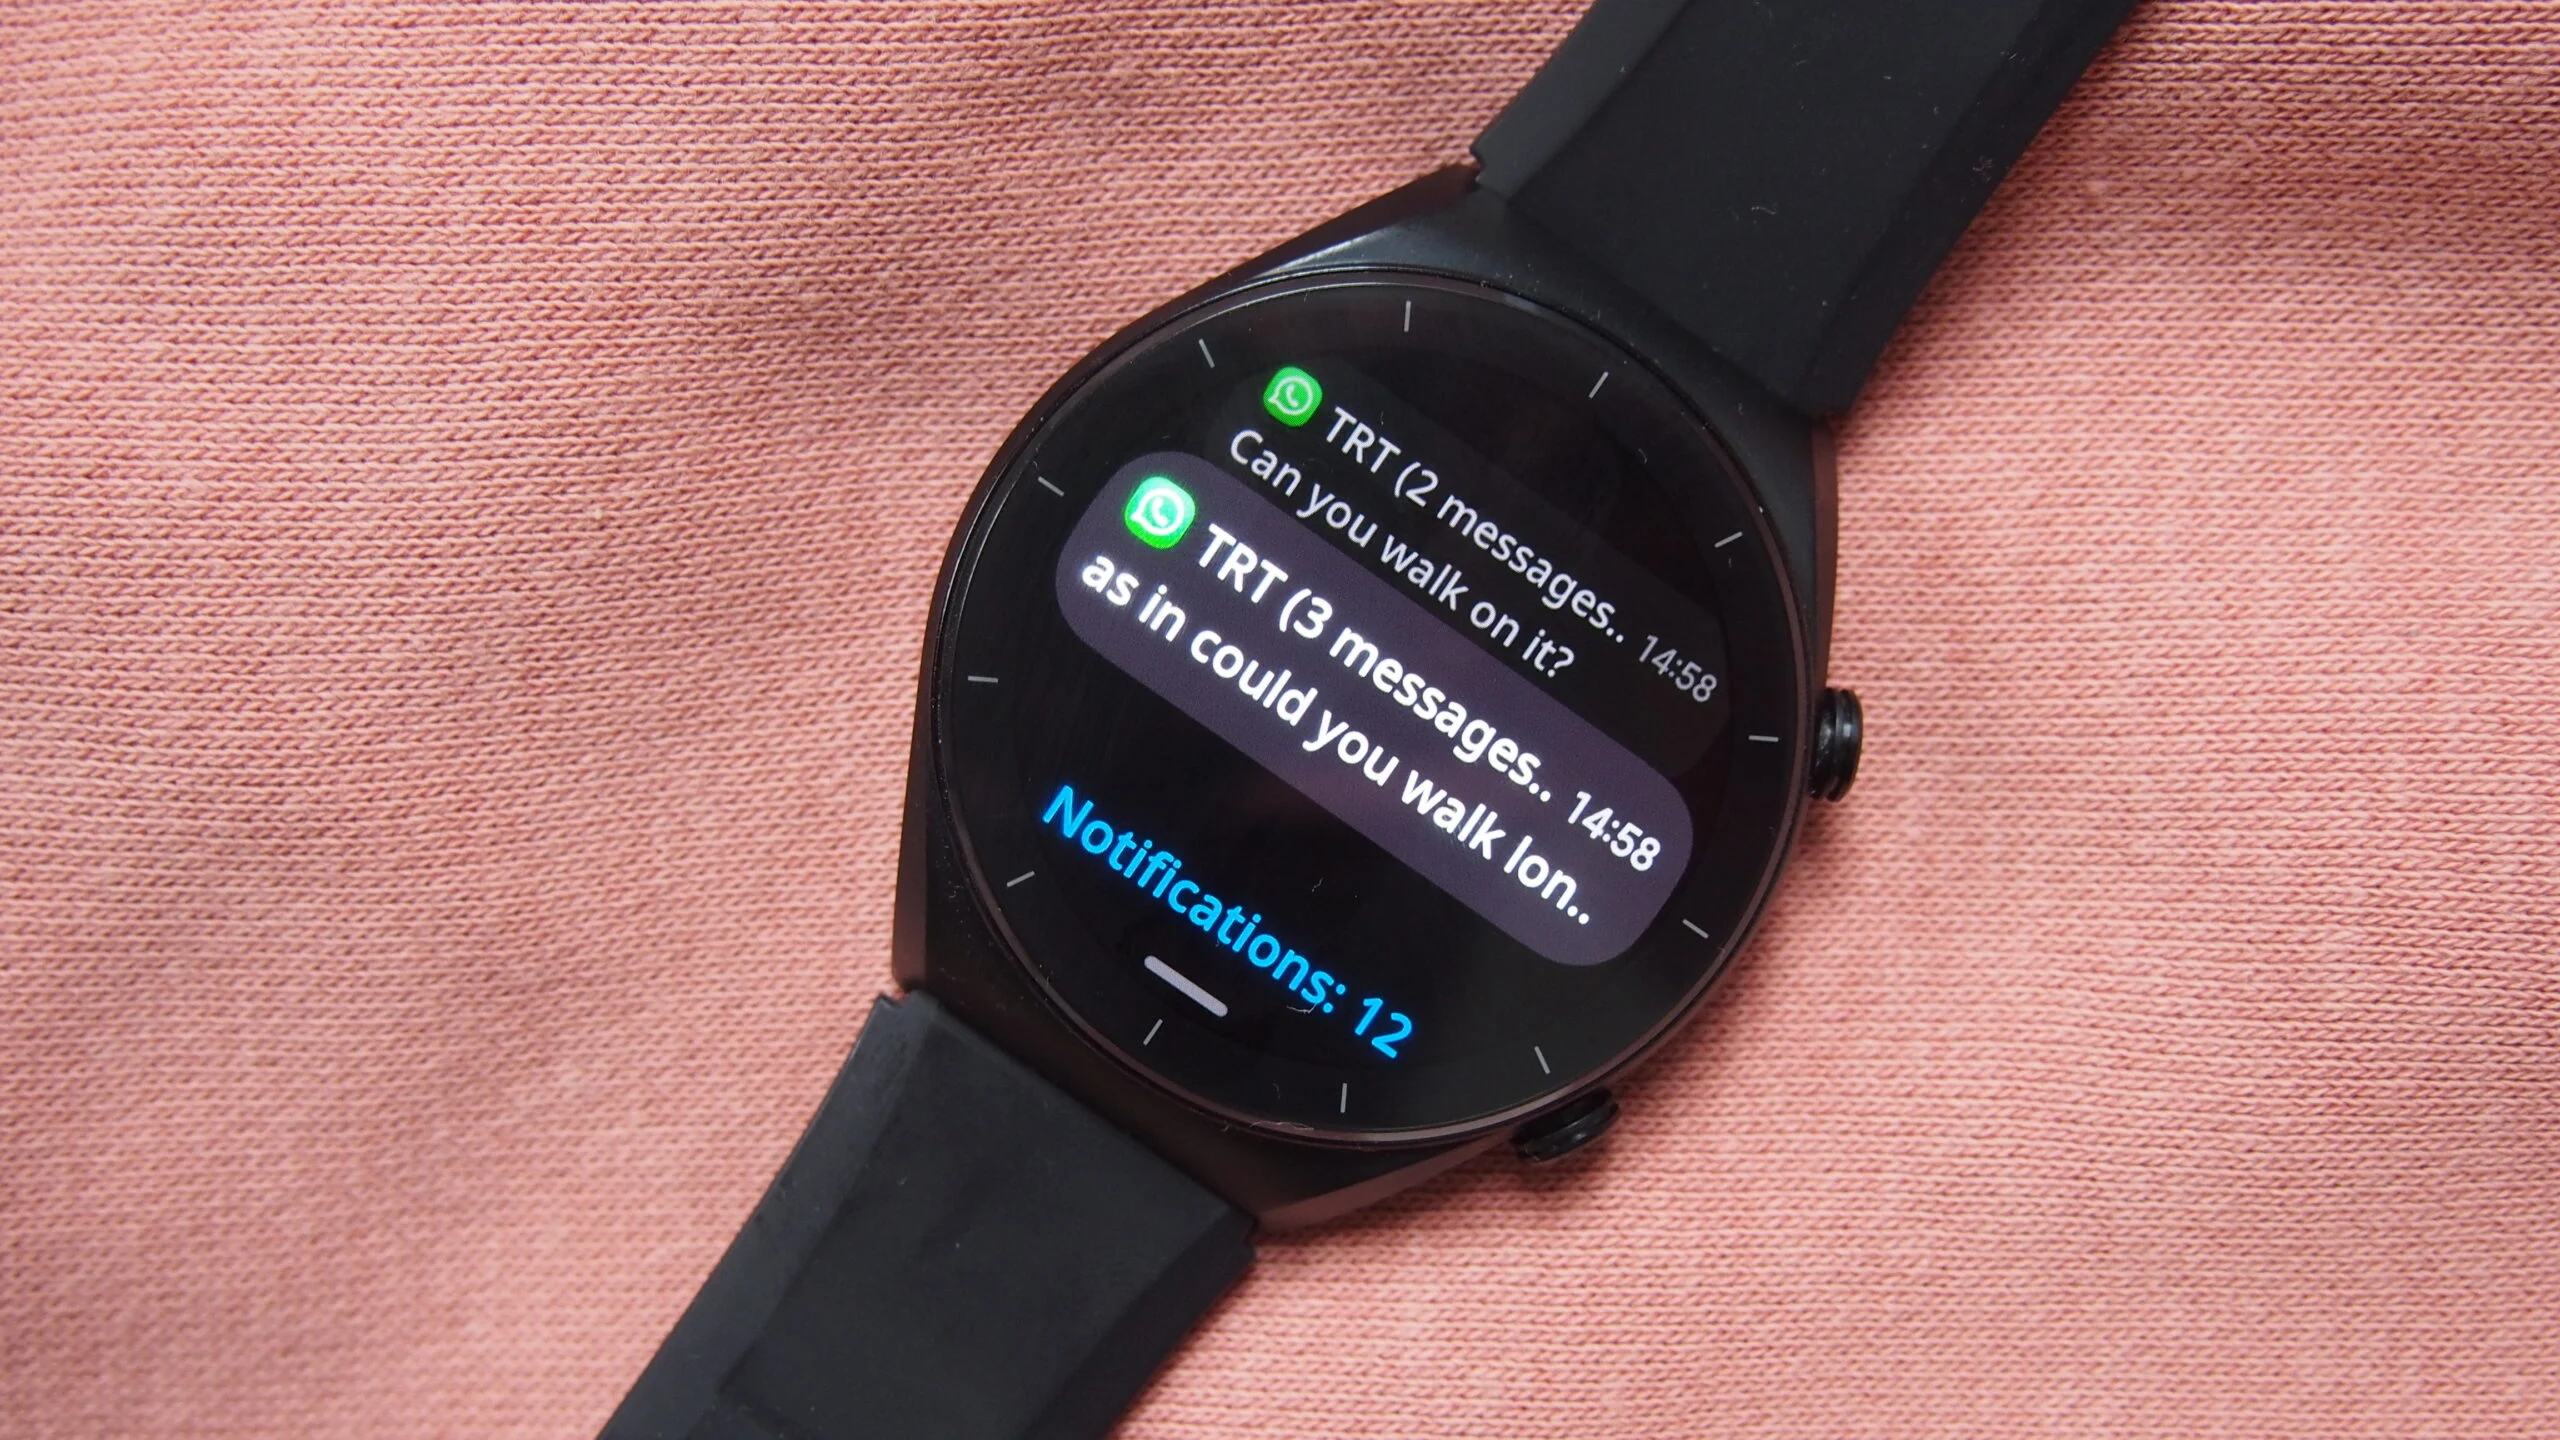 Why am i not getting notifications on my smartwatch